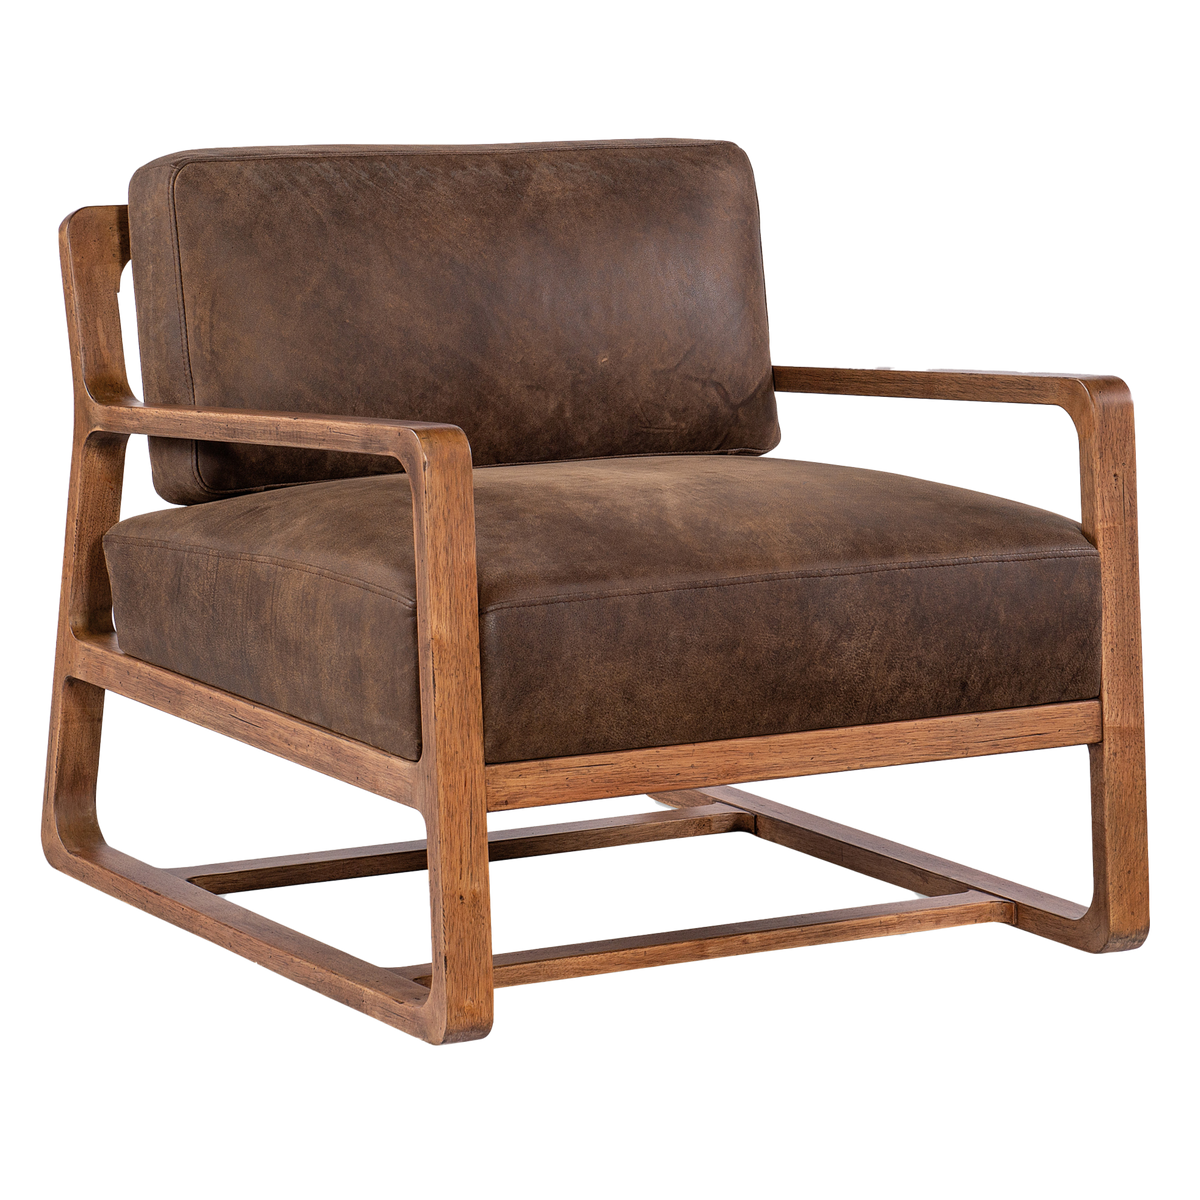 Malani Leather and Wood Upholstered Accent Chair, Brown